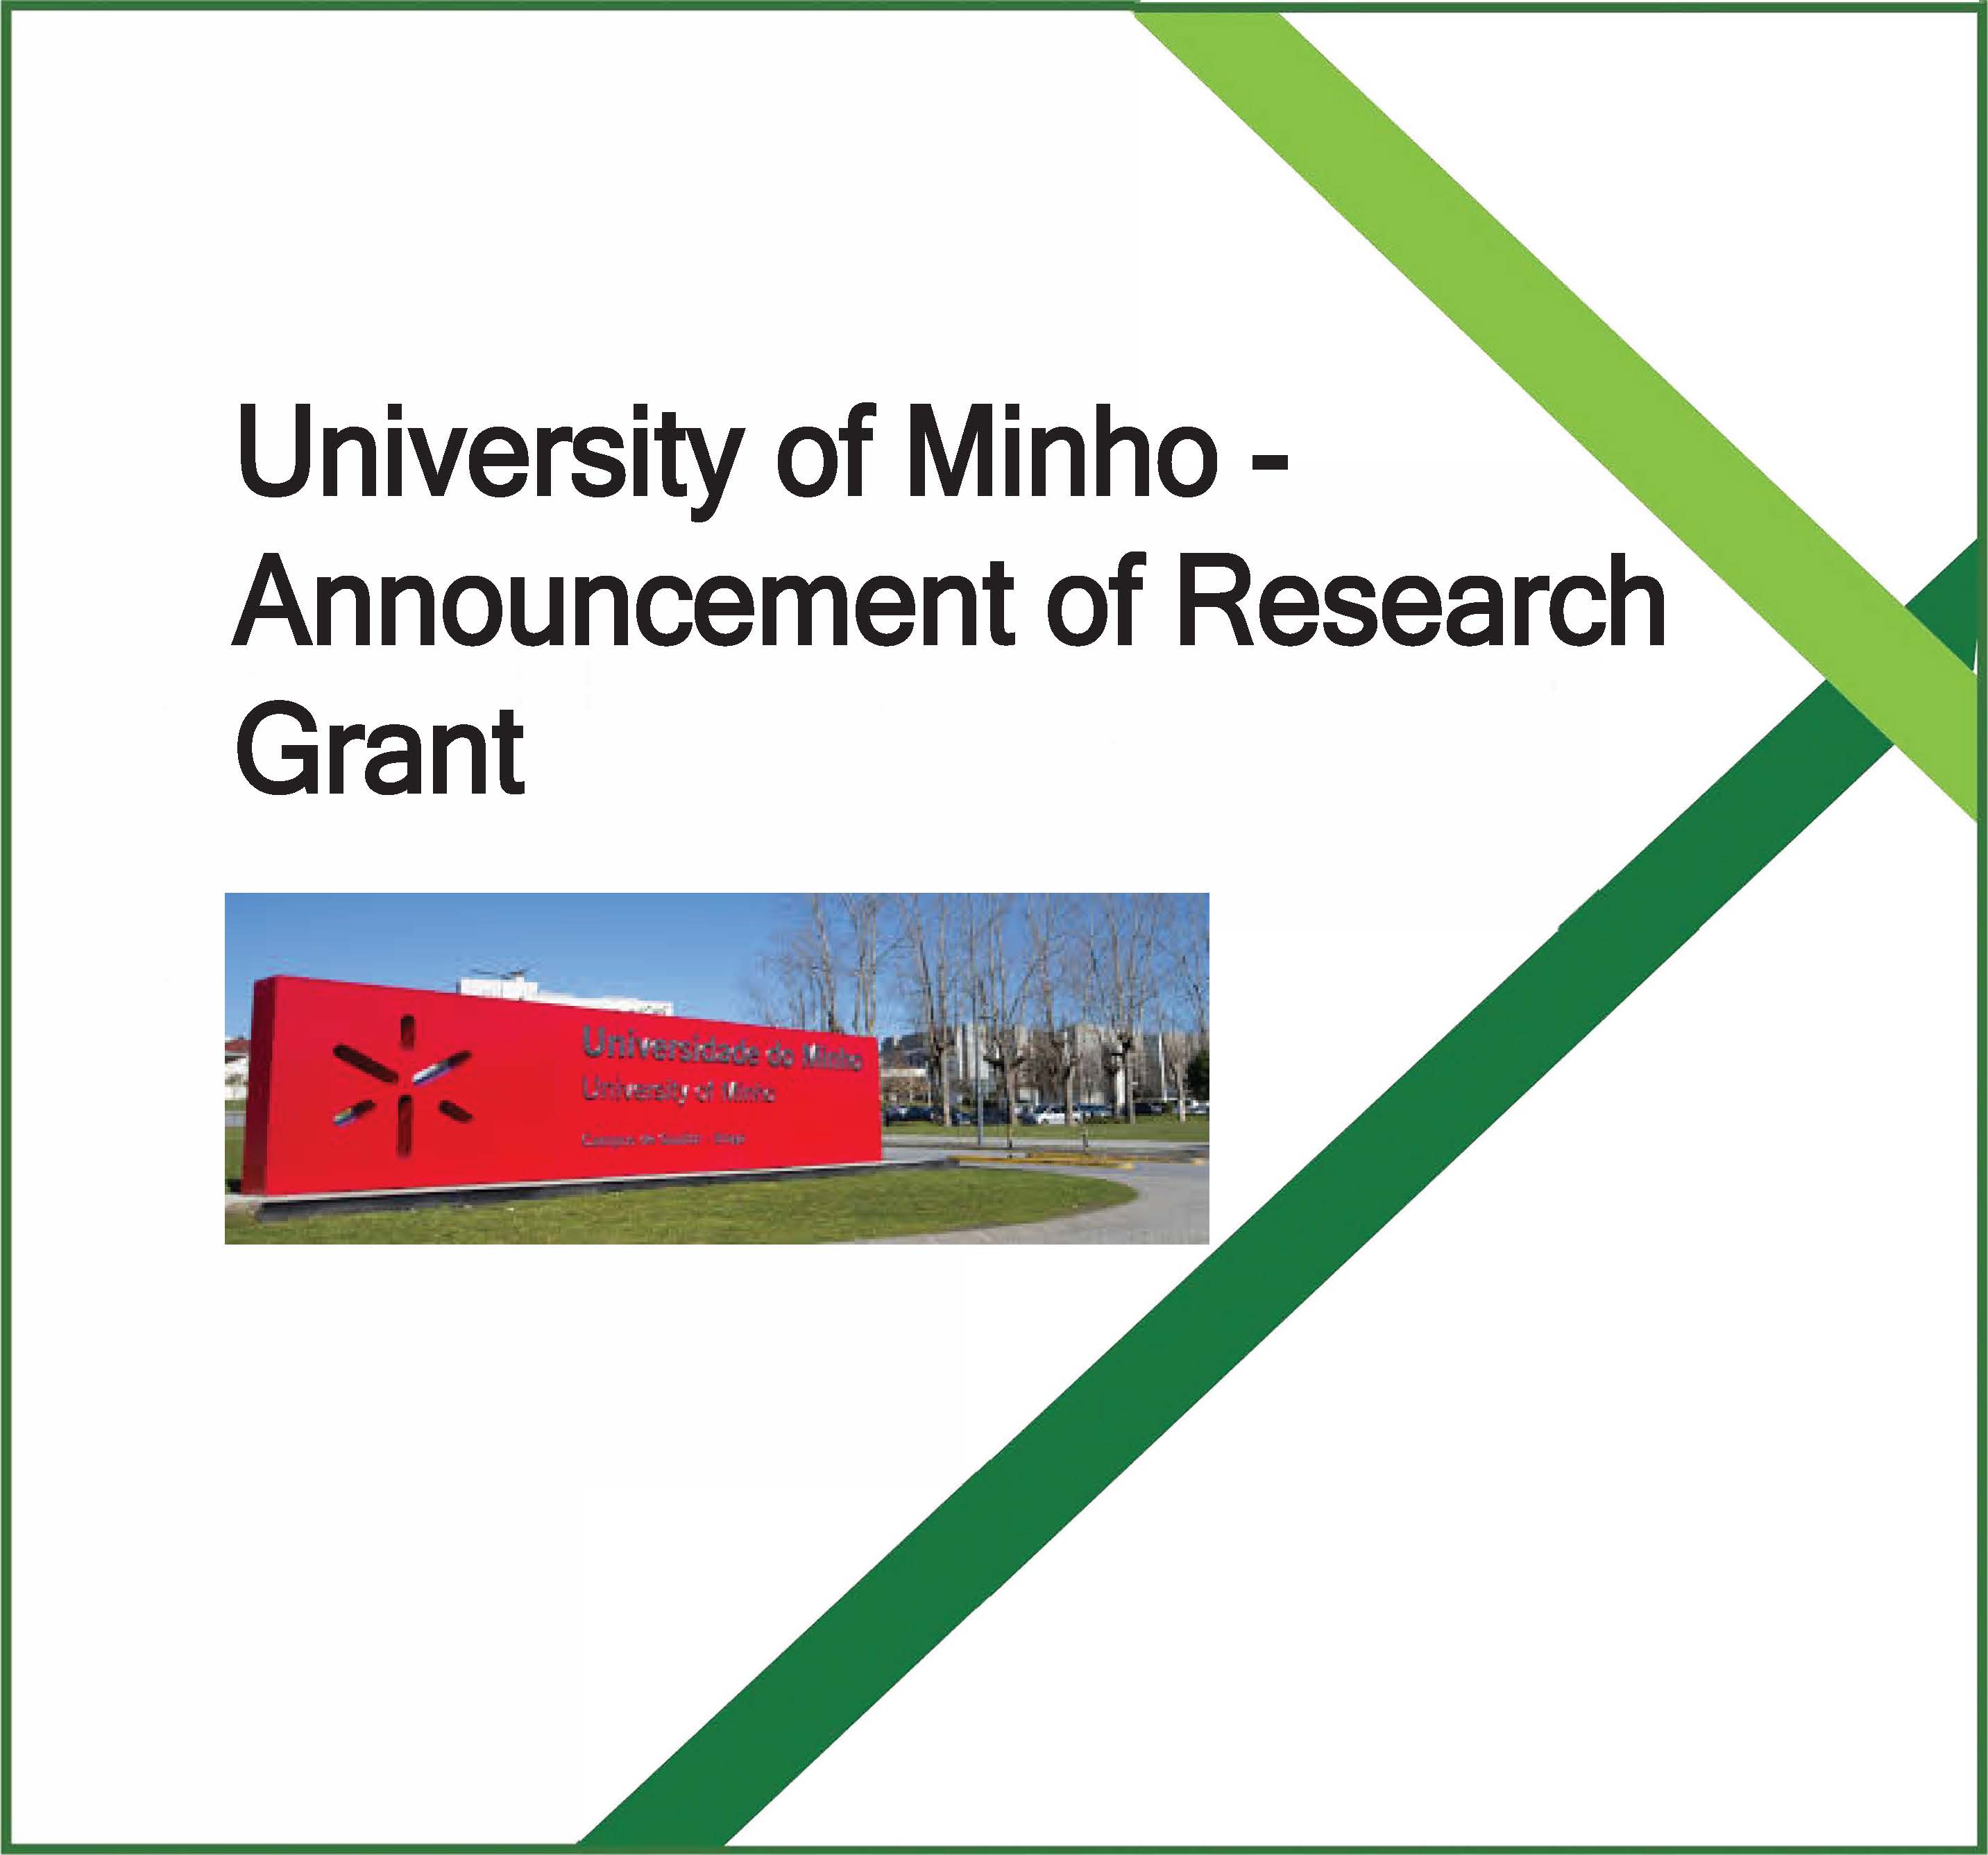 University of Minho – Announcement of Research Grant